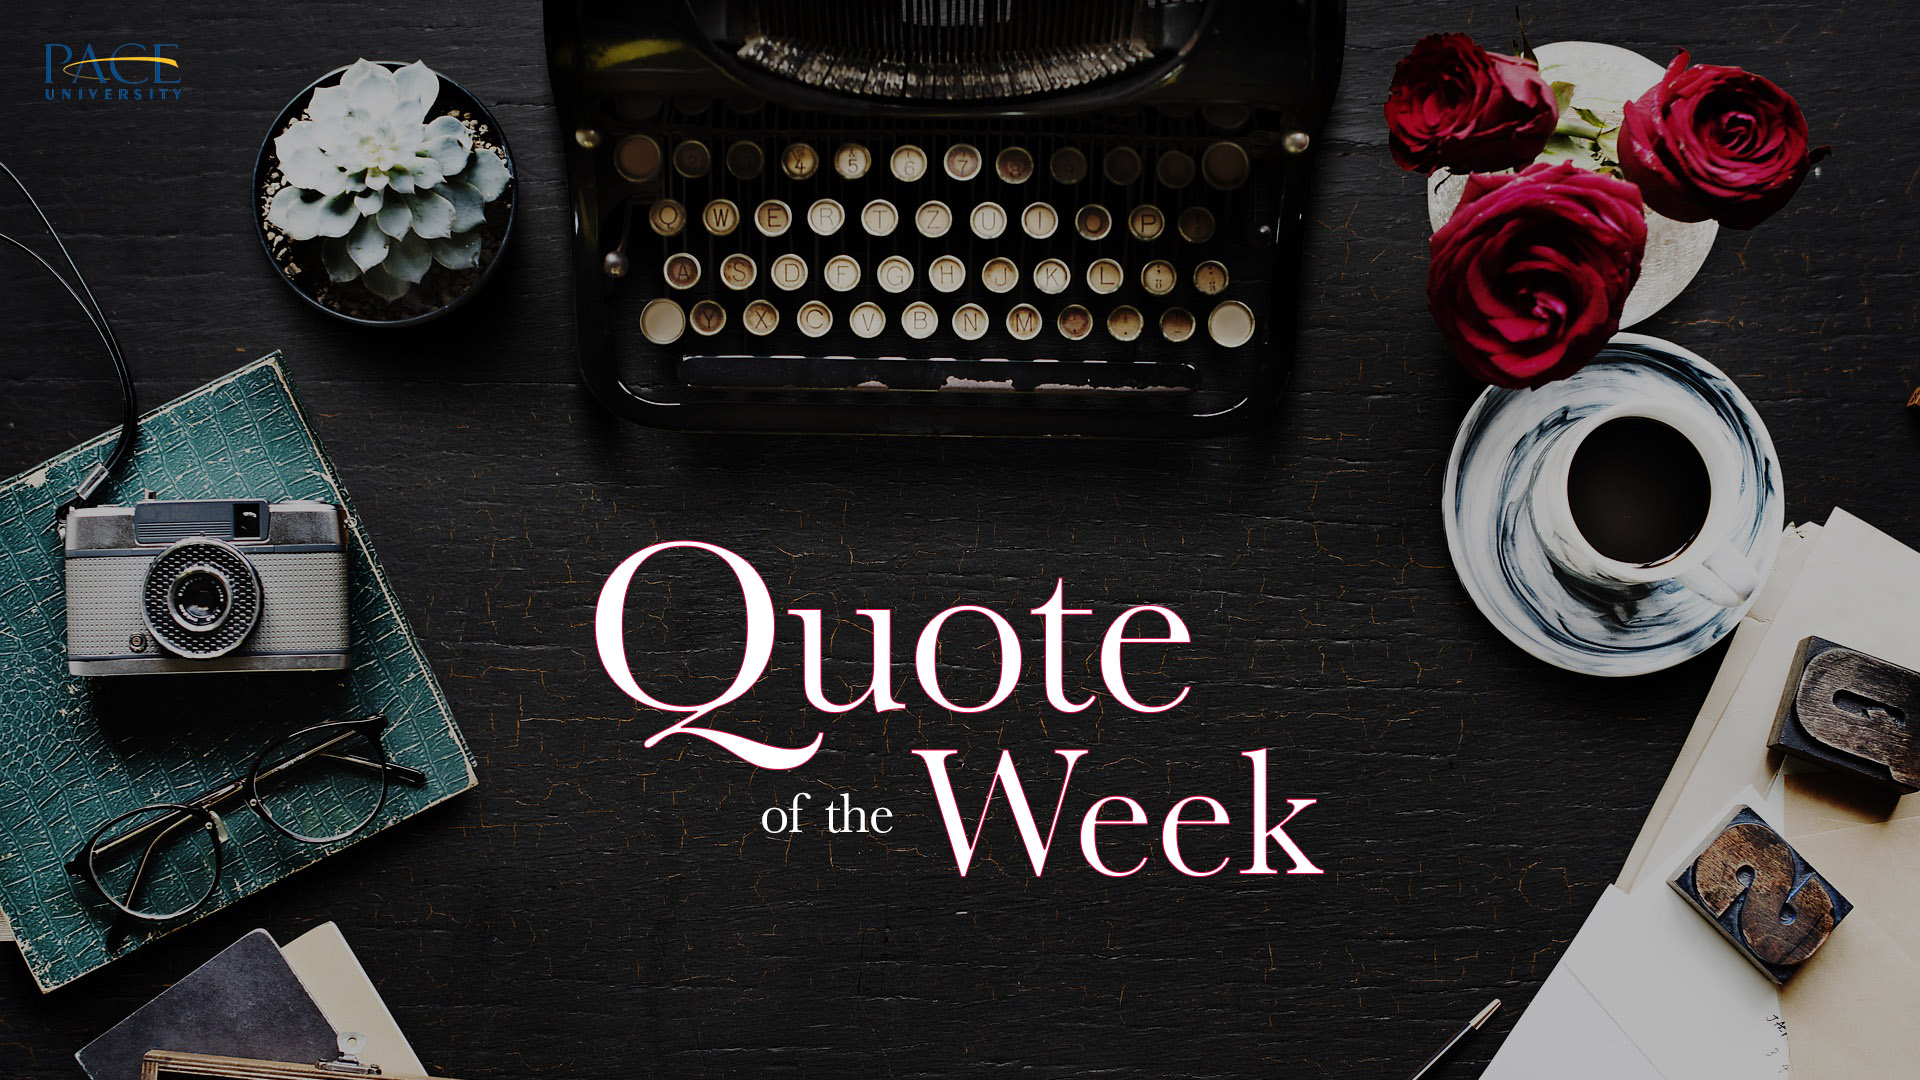 Quote of the Week | George North, the Original Bard?